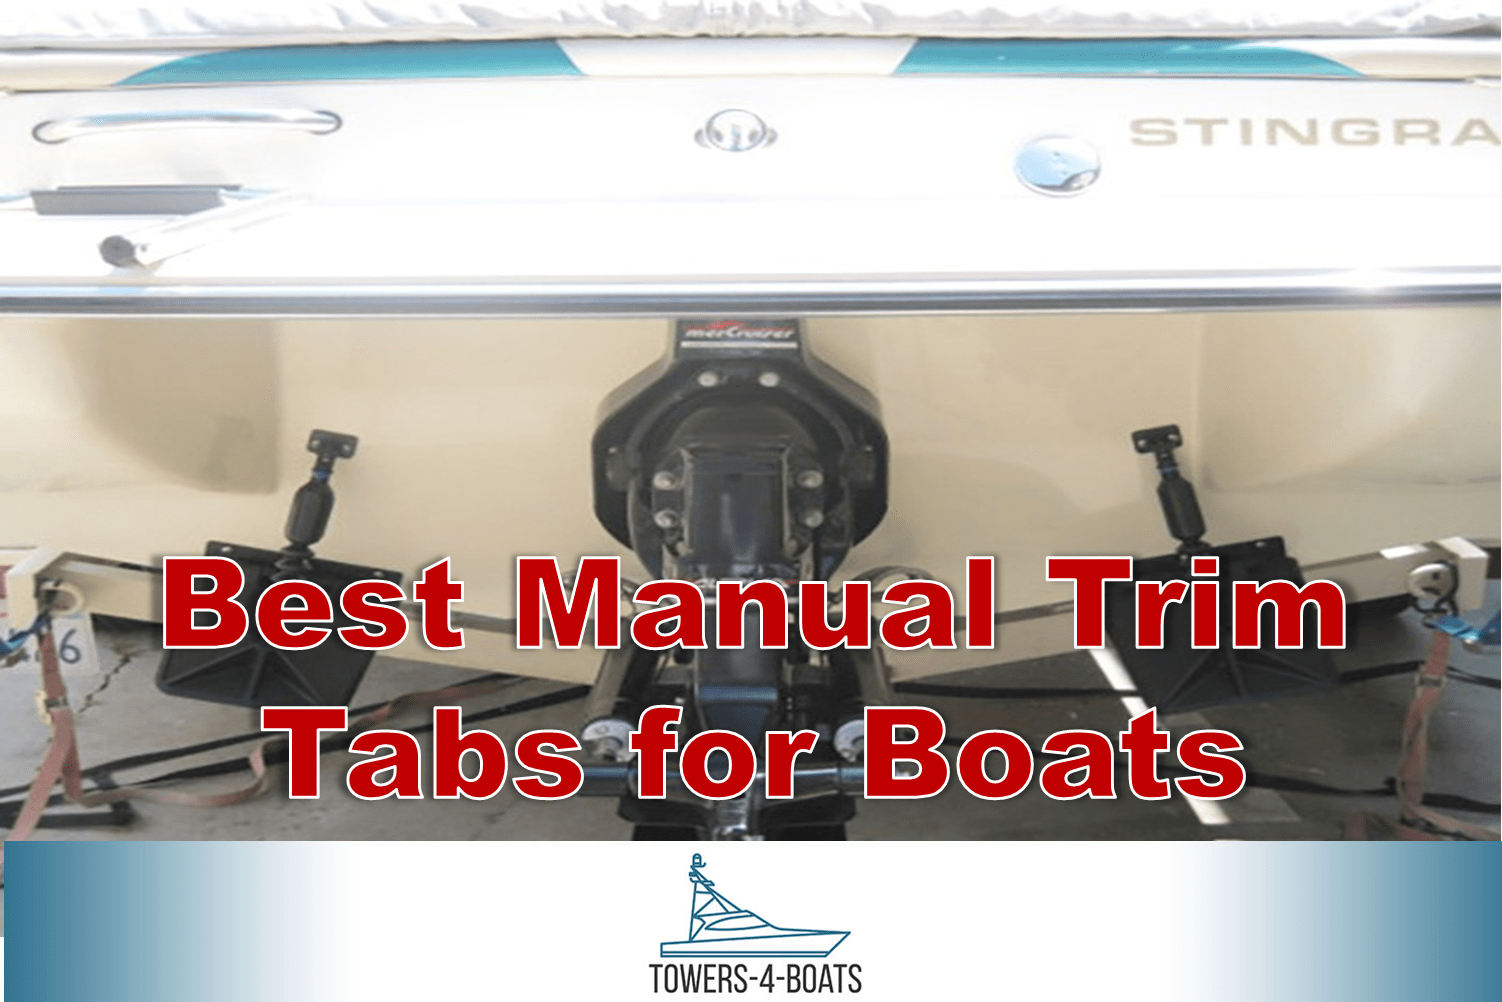 Best Manual Trim Tabs for Boats - Boating Life